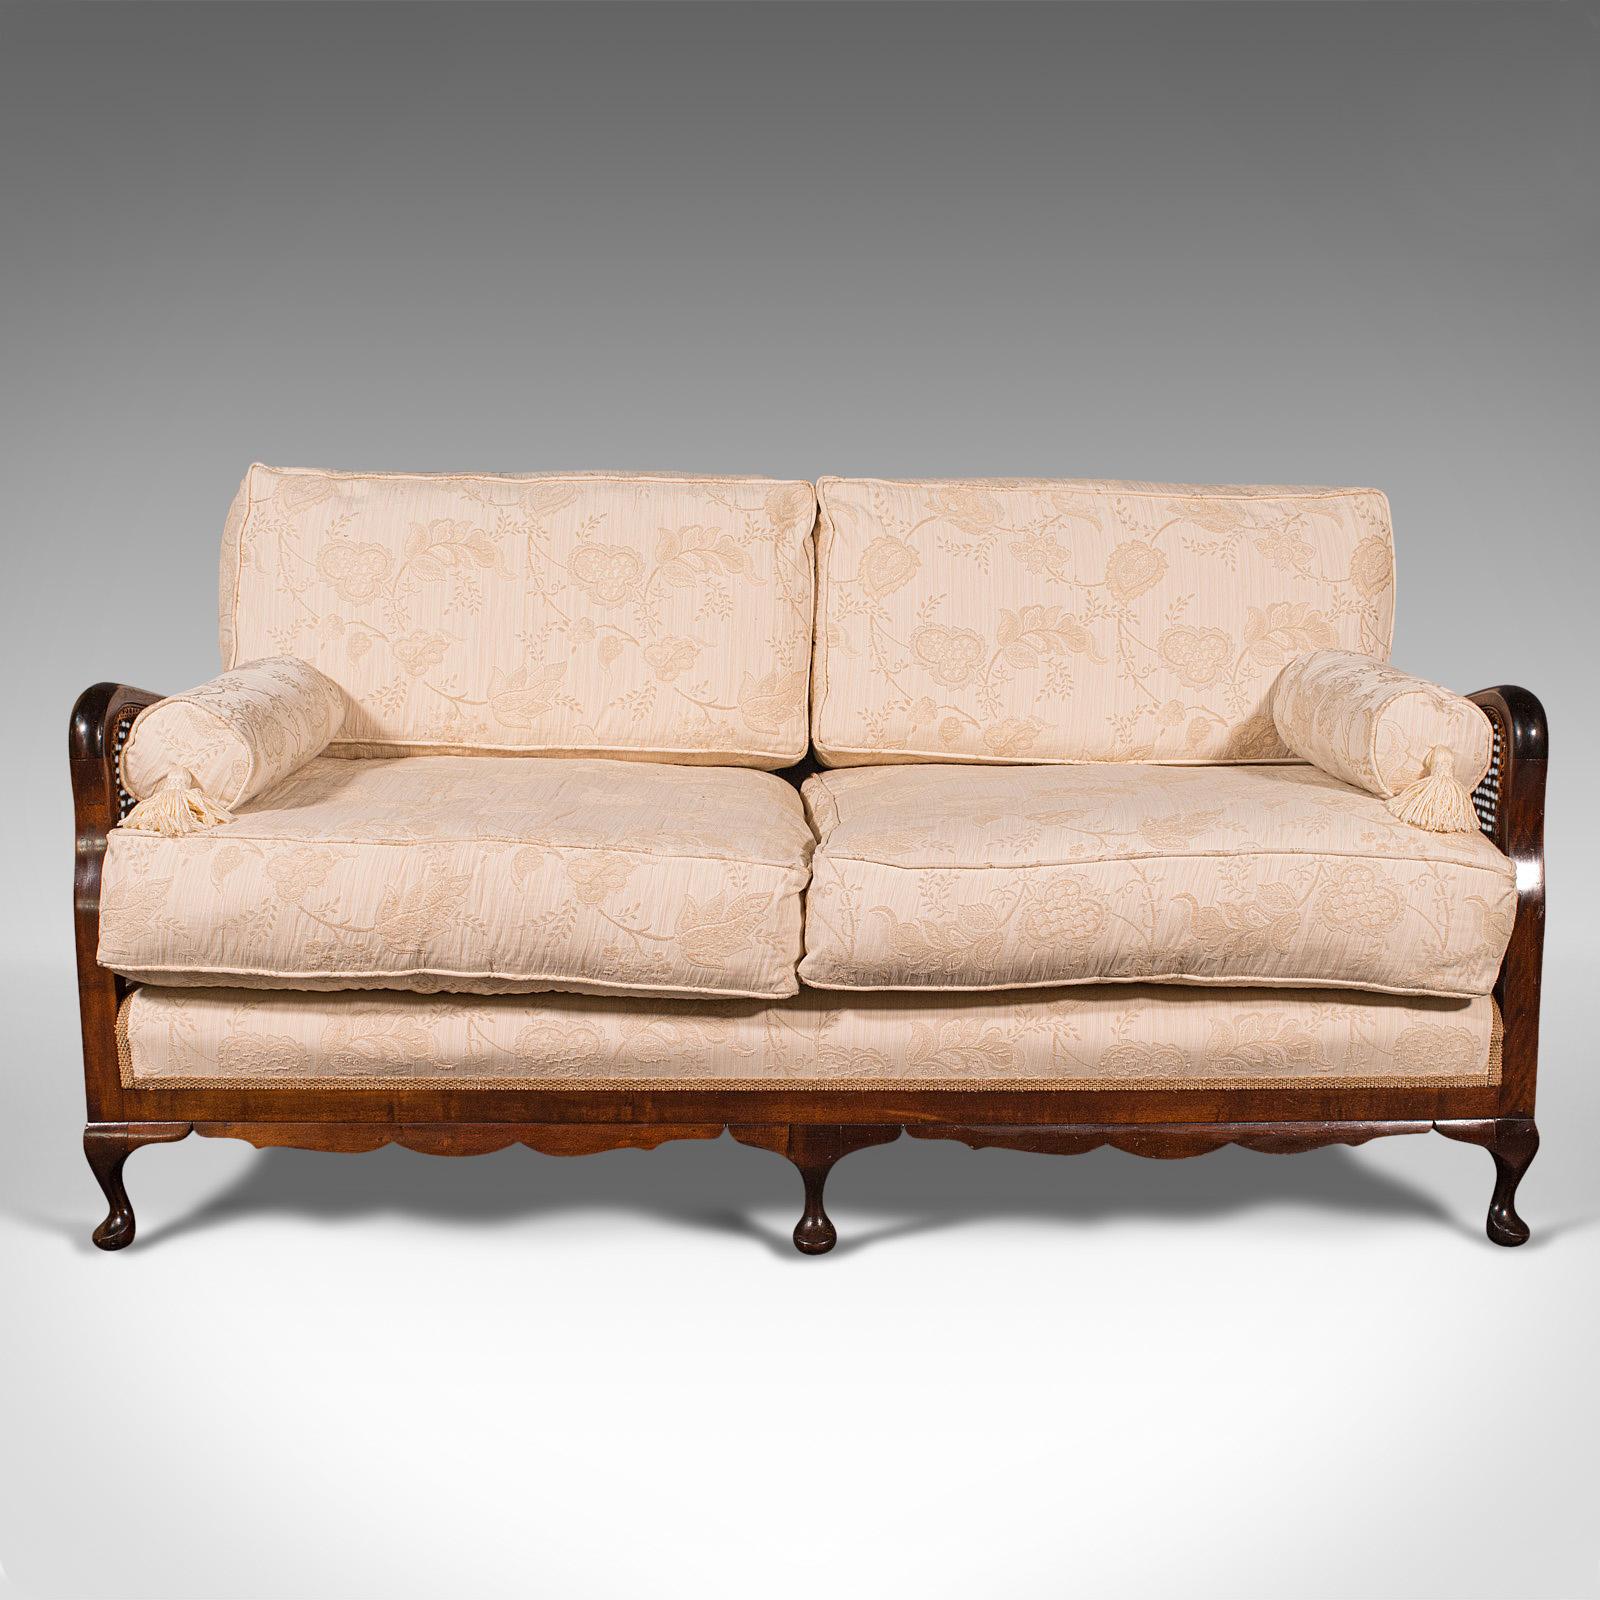 This is an antique bergere sofa. An English, beech and cane two seat settee, dating to the Edwardian period, circa 1910.

Presenting beautifully, a delightful living room or conservatory sofa
Displays a desirable aged patina and in good